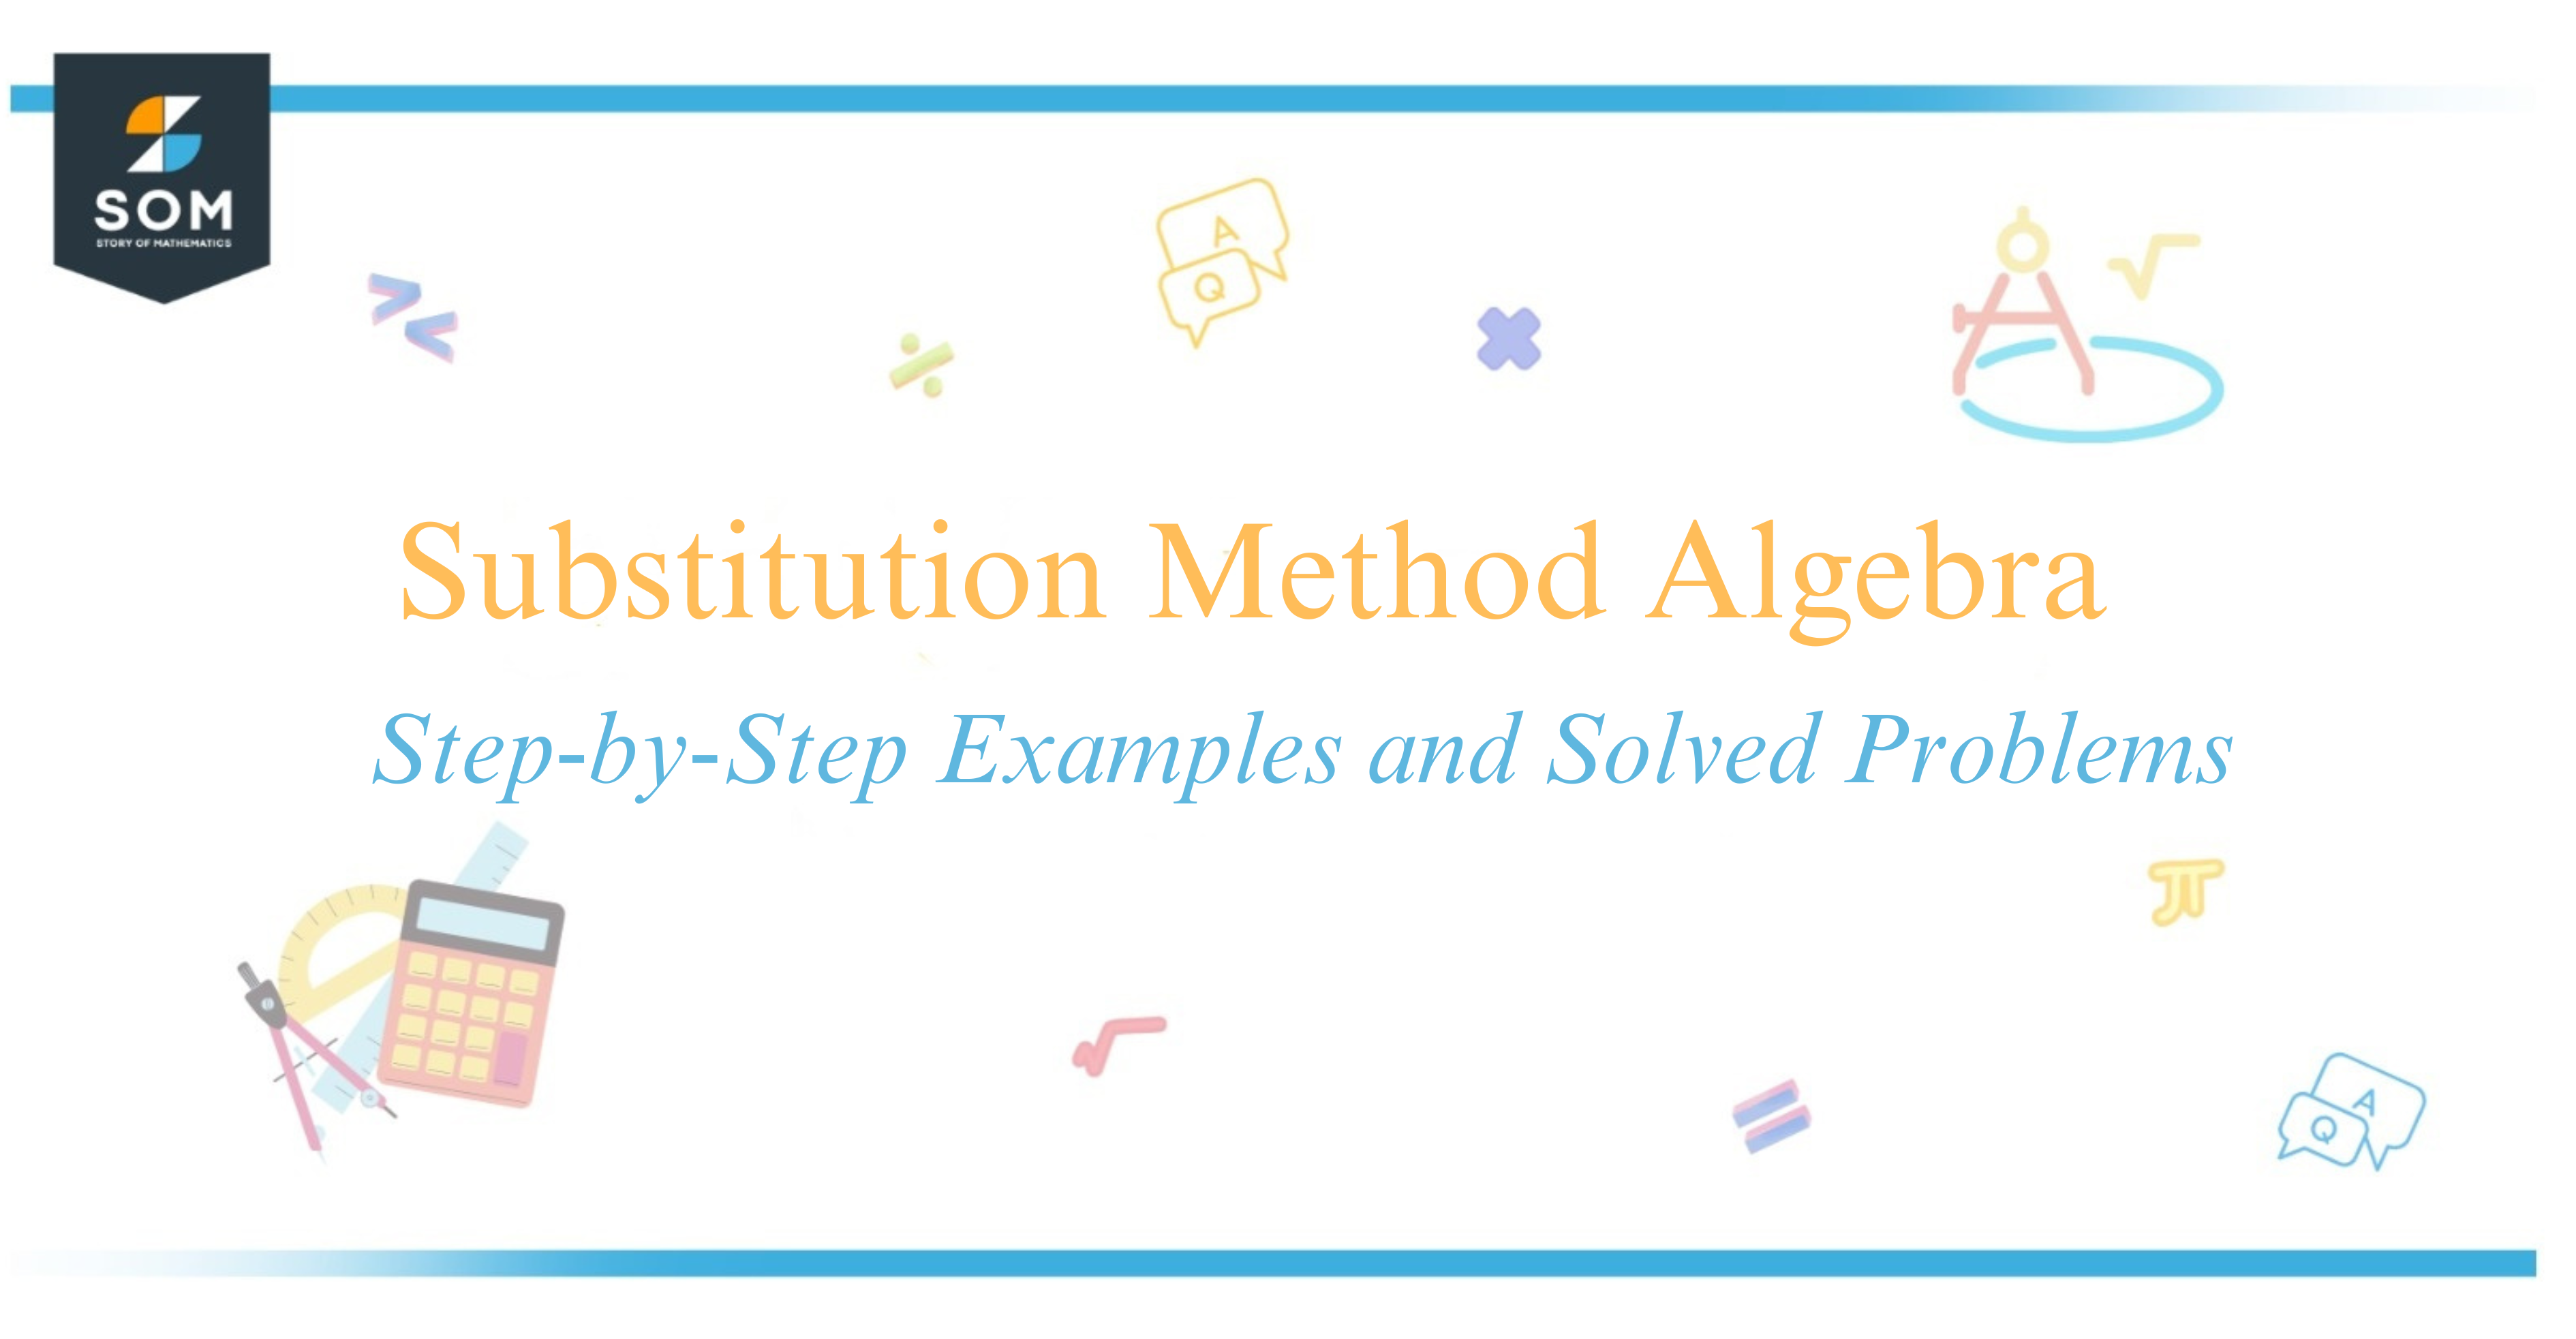 Substitution Method Algebra Step-by-Step Examples and Solved Problems